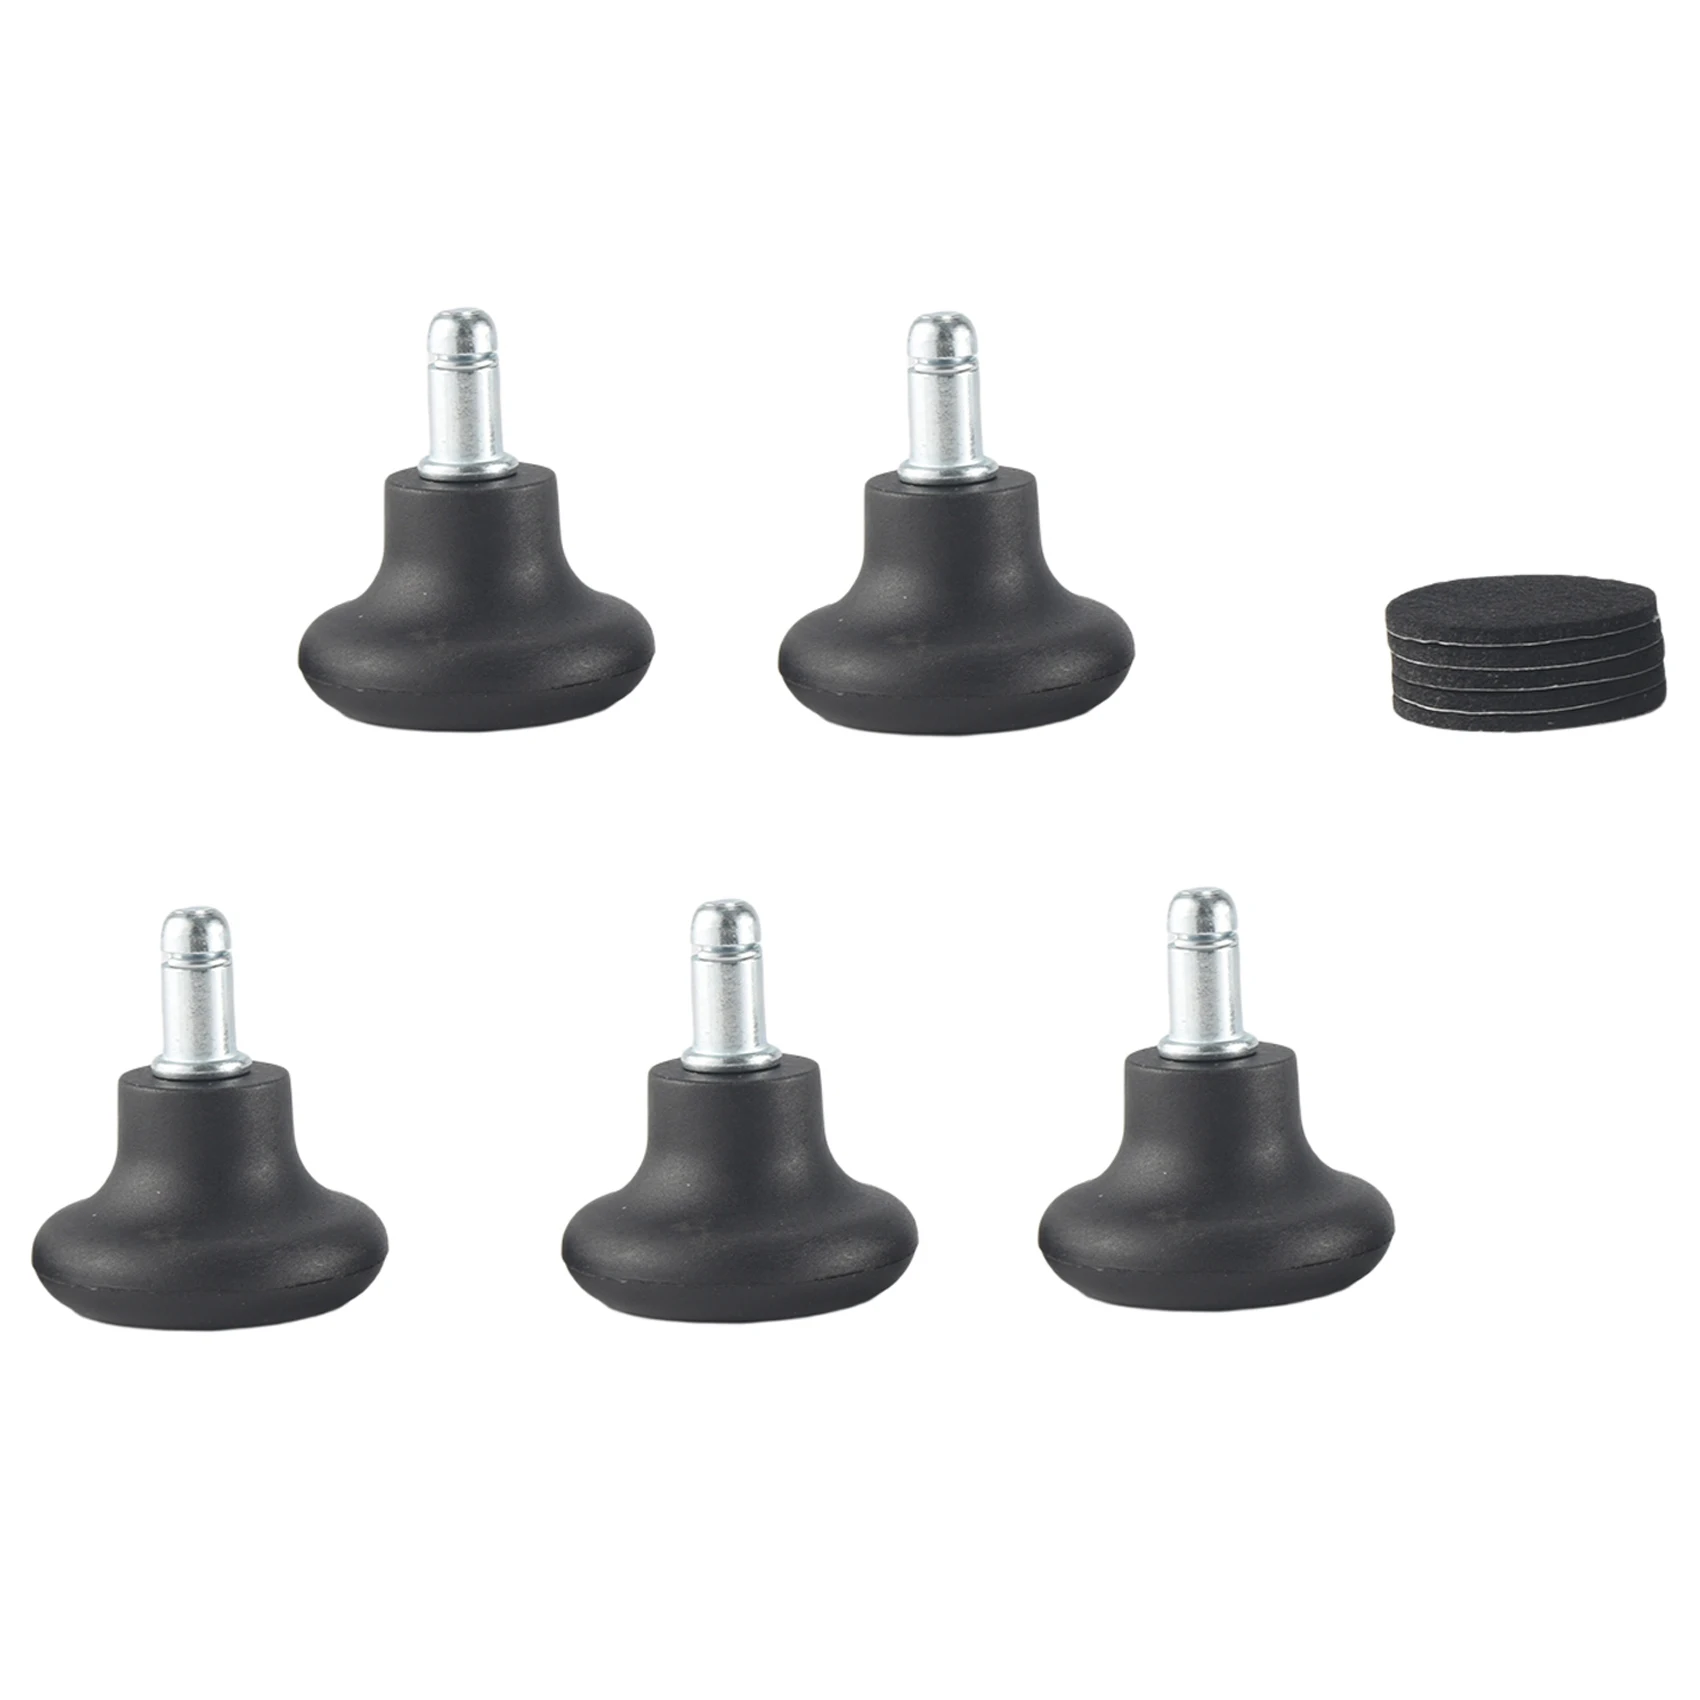 

5 Pack Bell Glides for Office Chair Without Wheels, Replacement Rolling Chair Swivel Wheels Fixed Stationary Castors